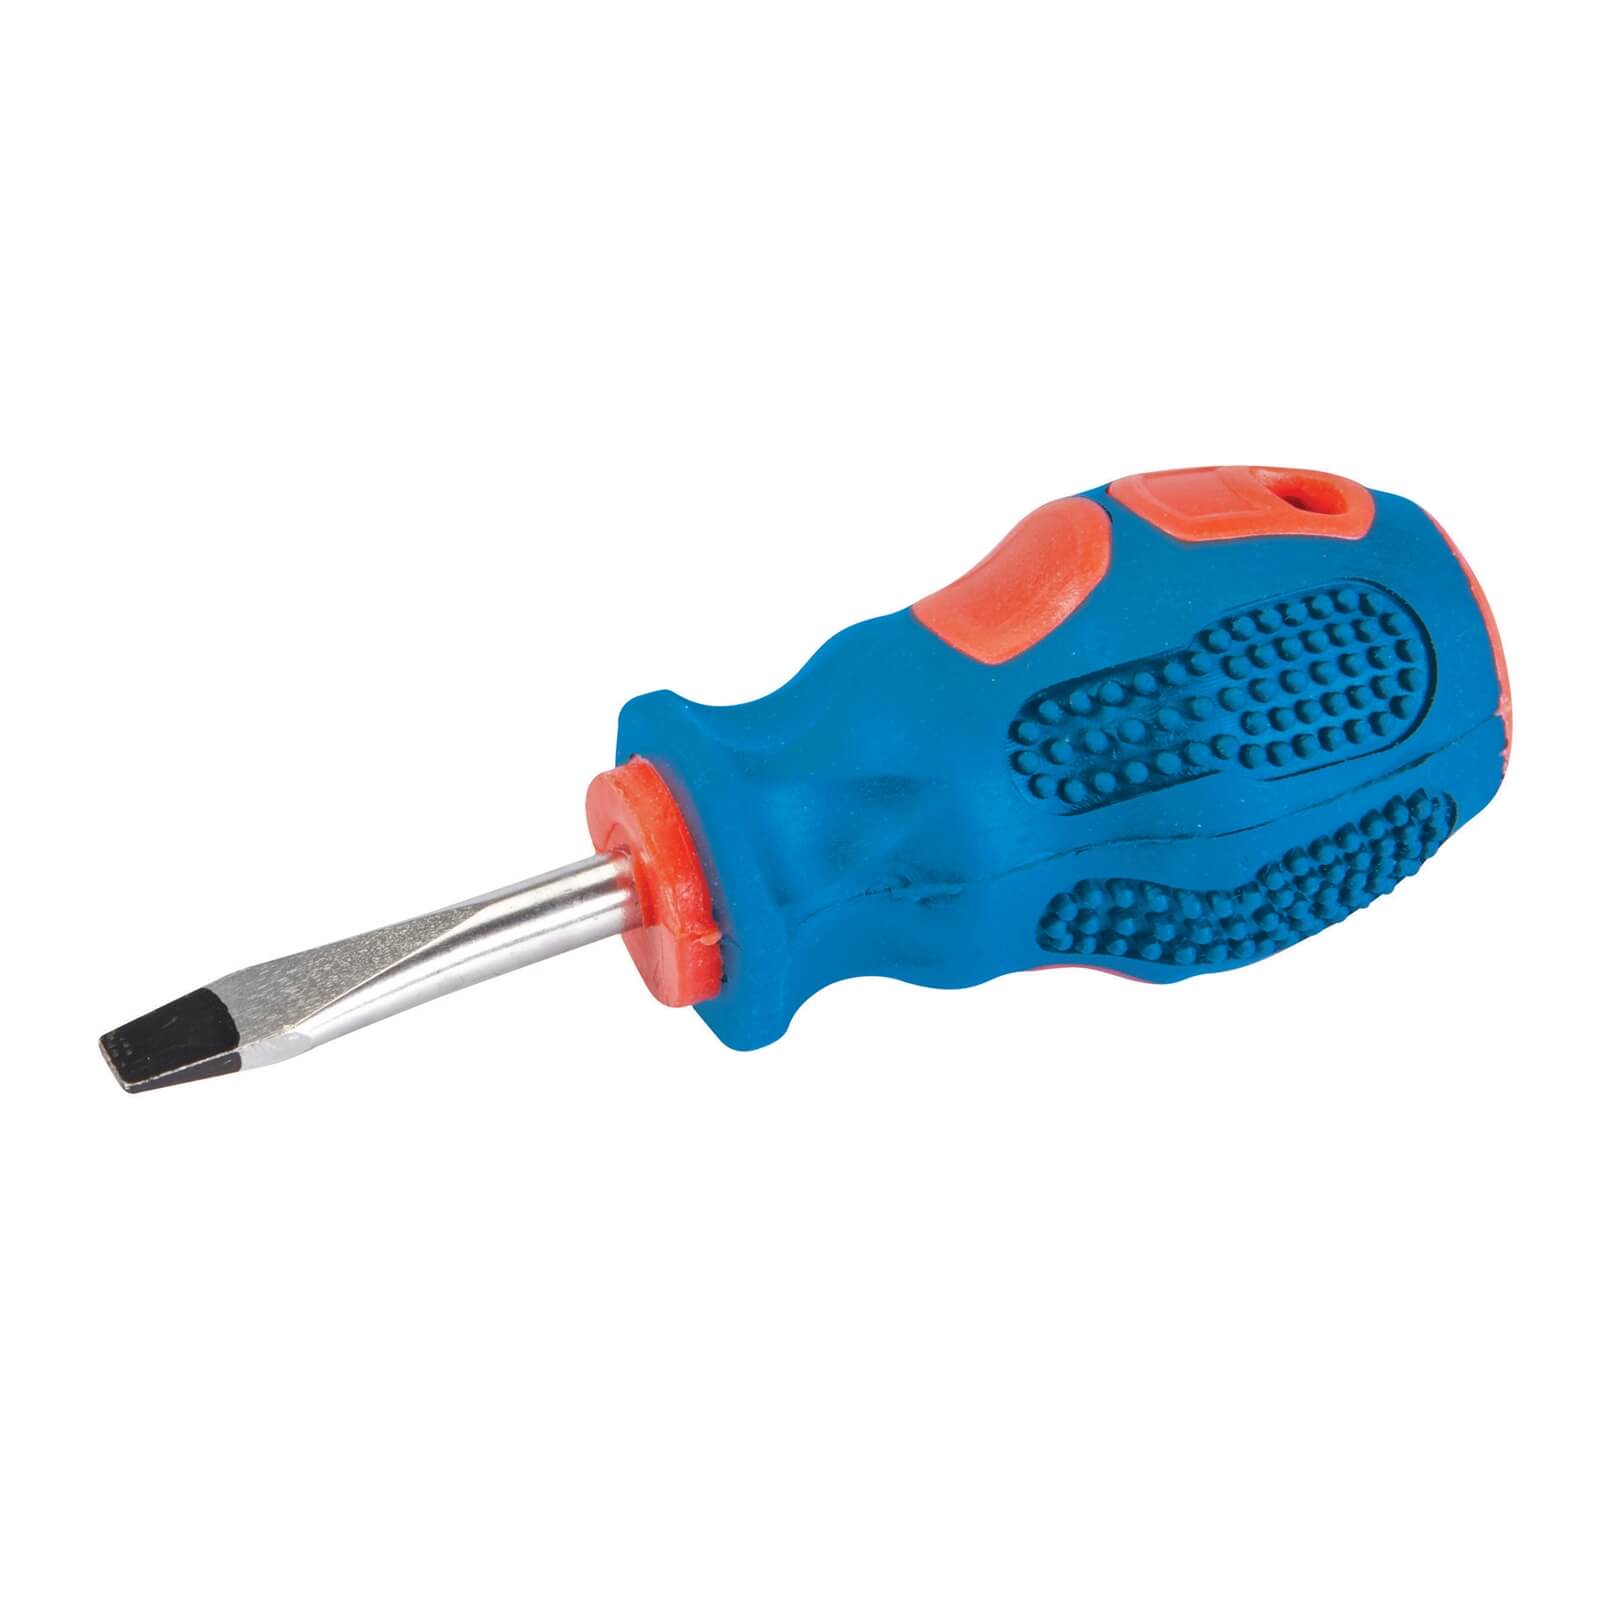 Silverline General Purpose Screwdriver Slotted Flared 6 x 38mm